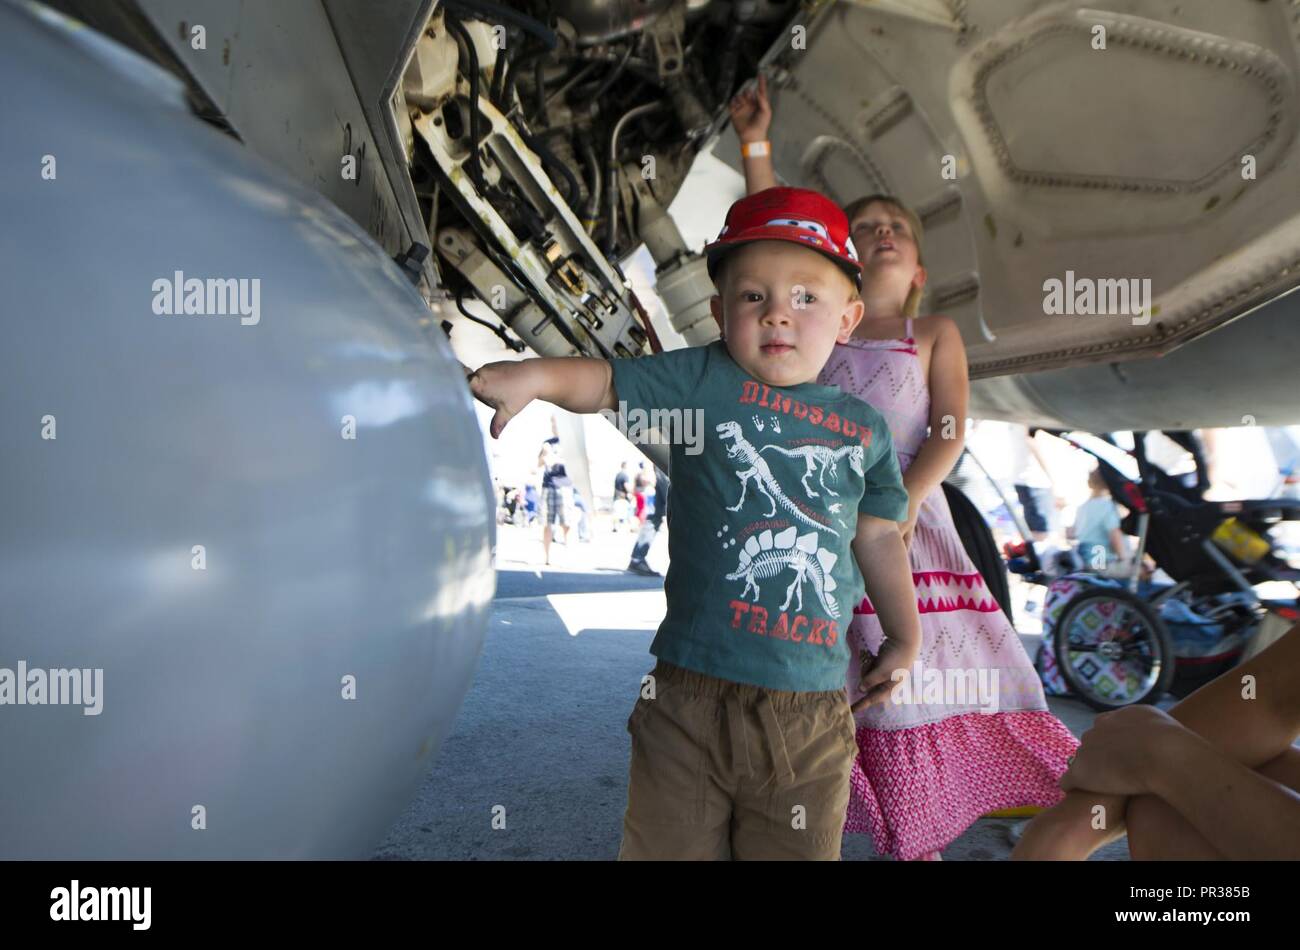 A child touches an aircraft during SkyFest 2017 Air Show and Open House at Fairchild Air Force Base, Washington, July 30, 2017. SkyFest was hosted  to thank the local and regional community for their support and give them the opportunity to meet Airmen and learn about the Air Force mission. Stock Photo